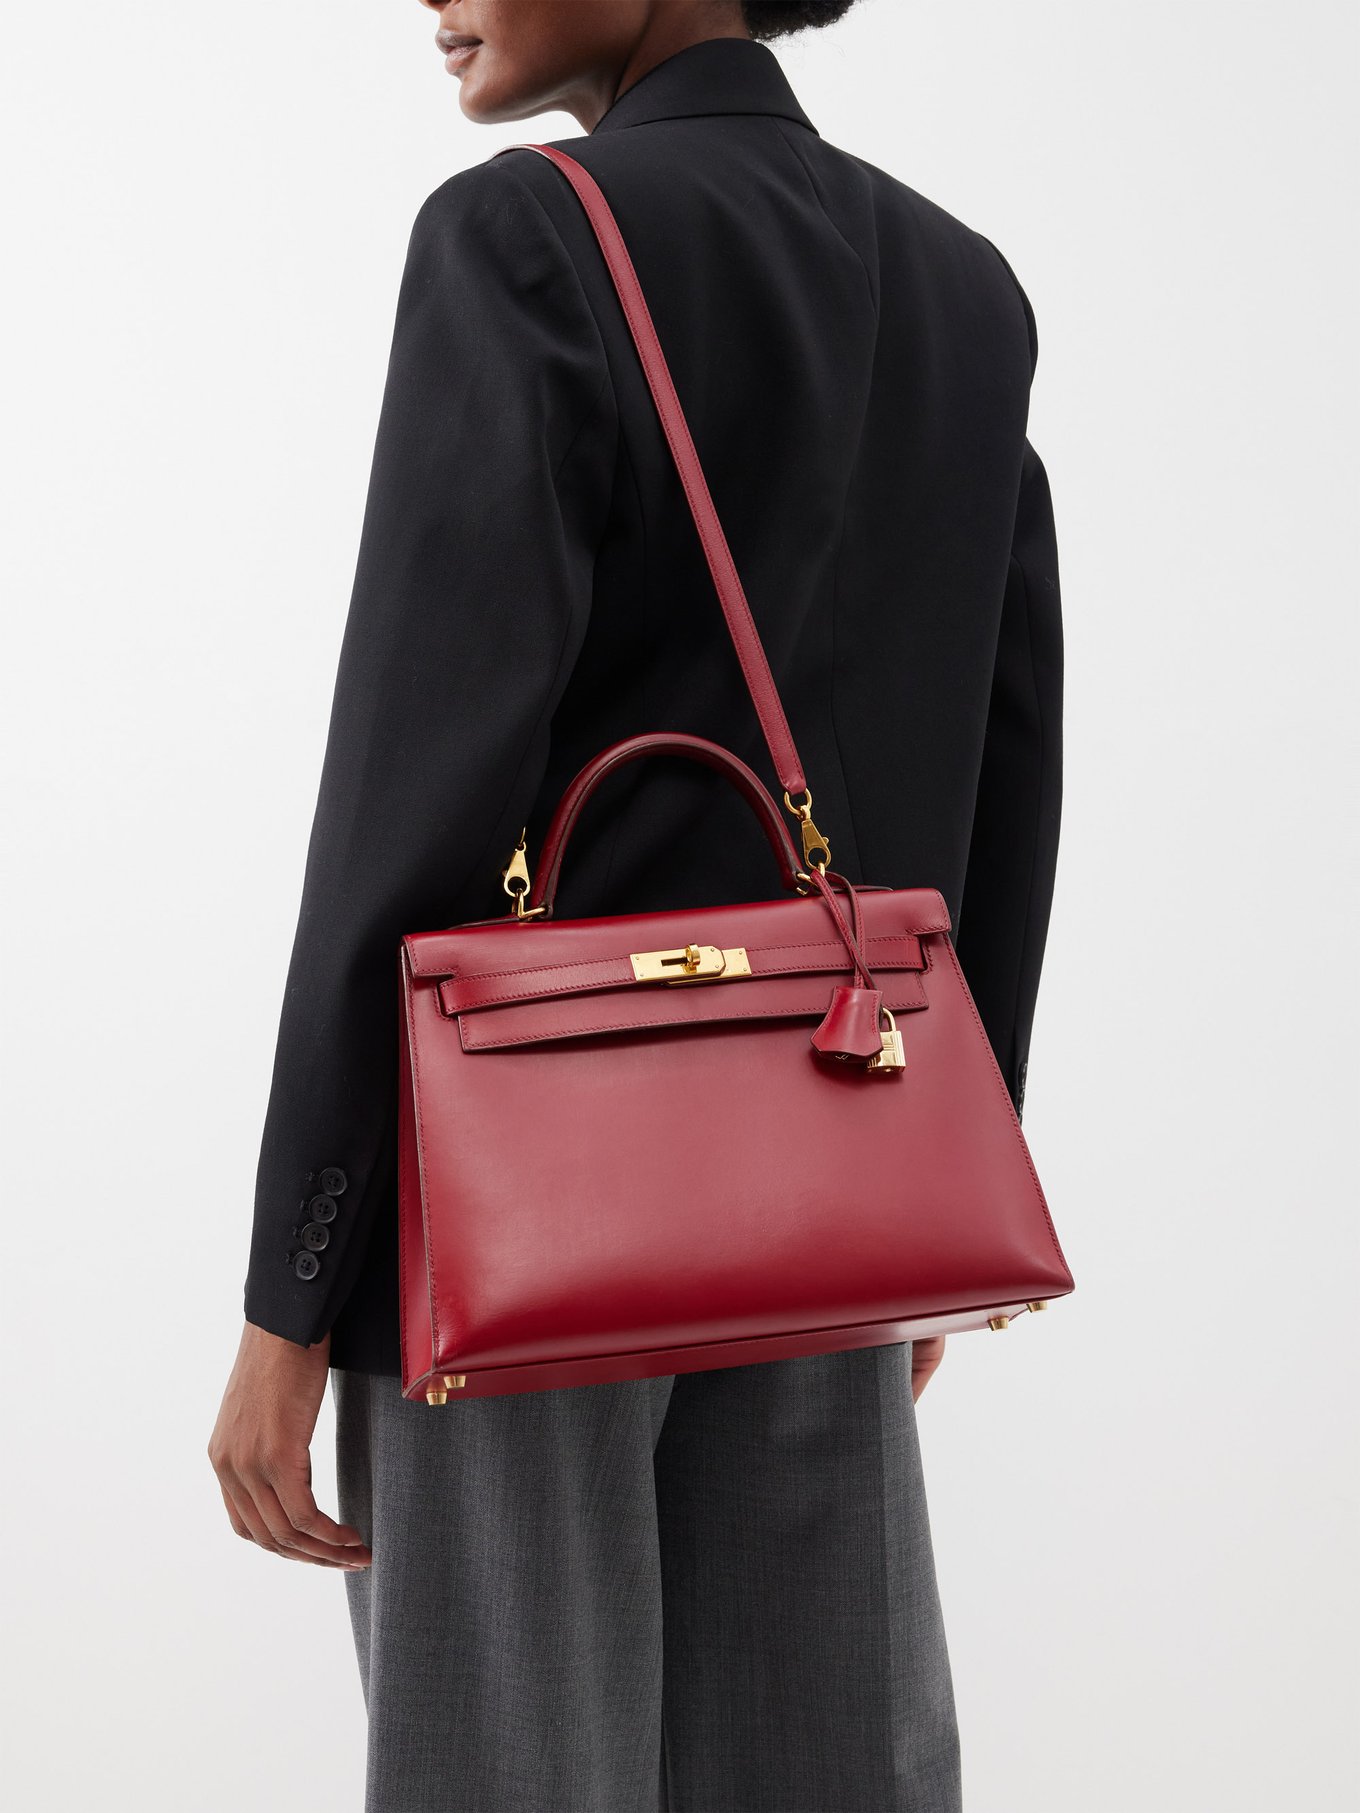 Hermes Kelly size chart  Hermes kelly, Personal style, My style